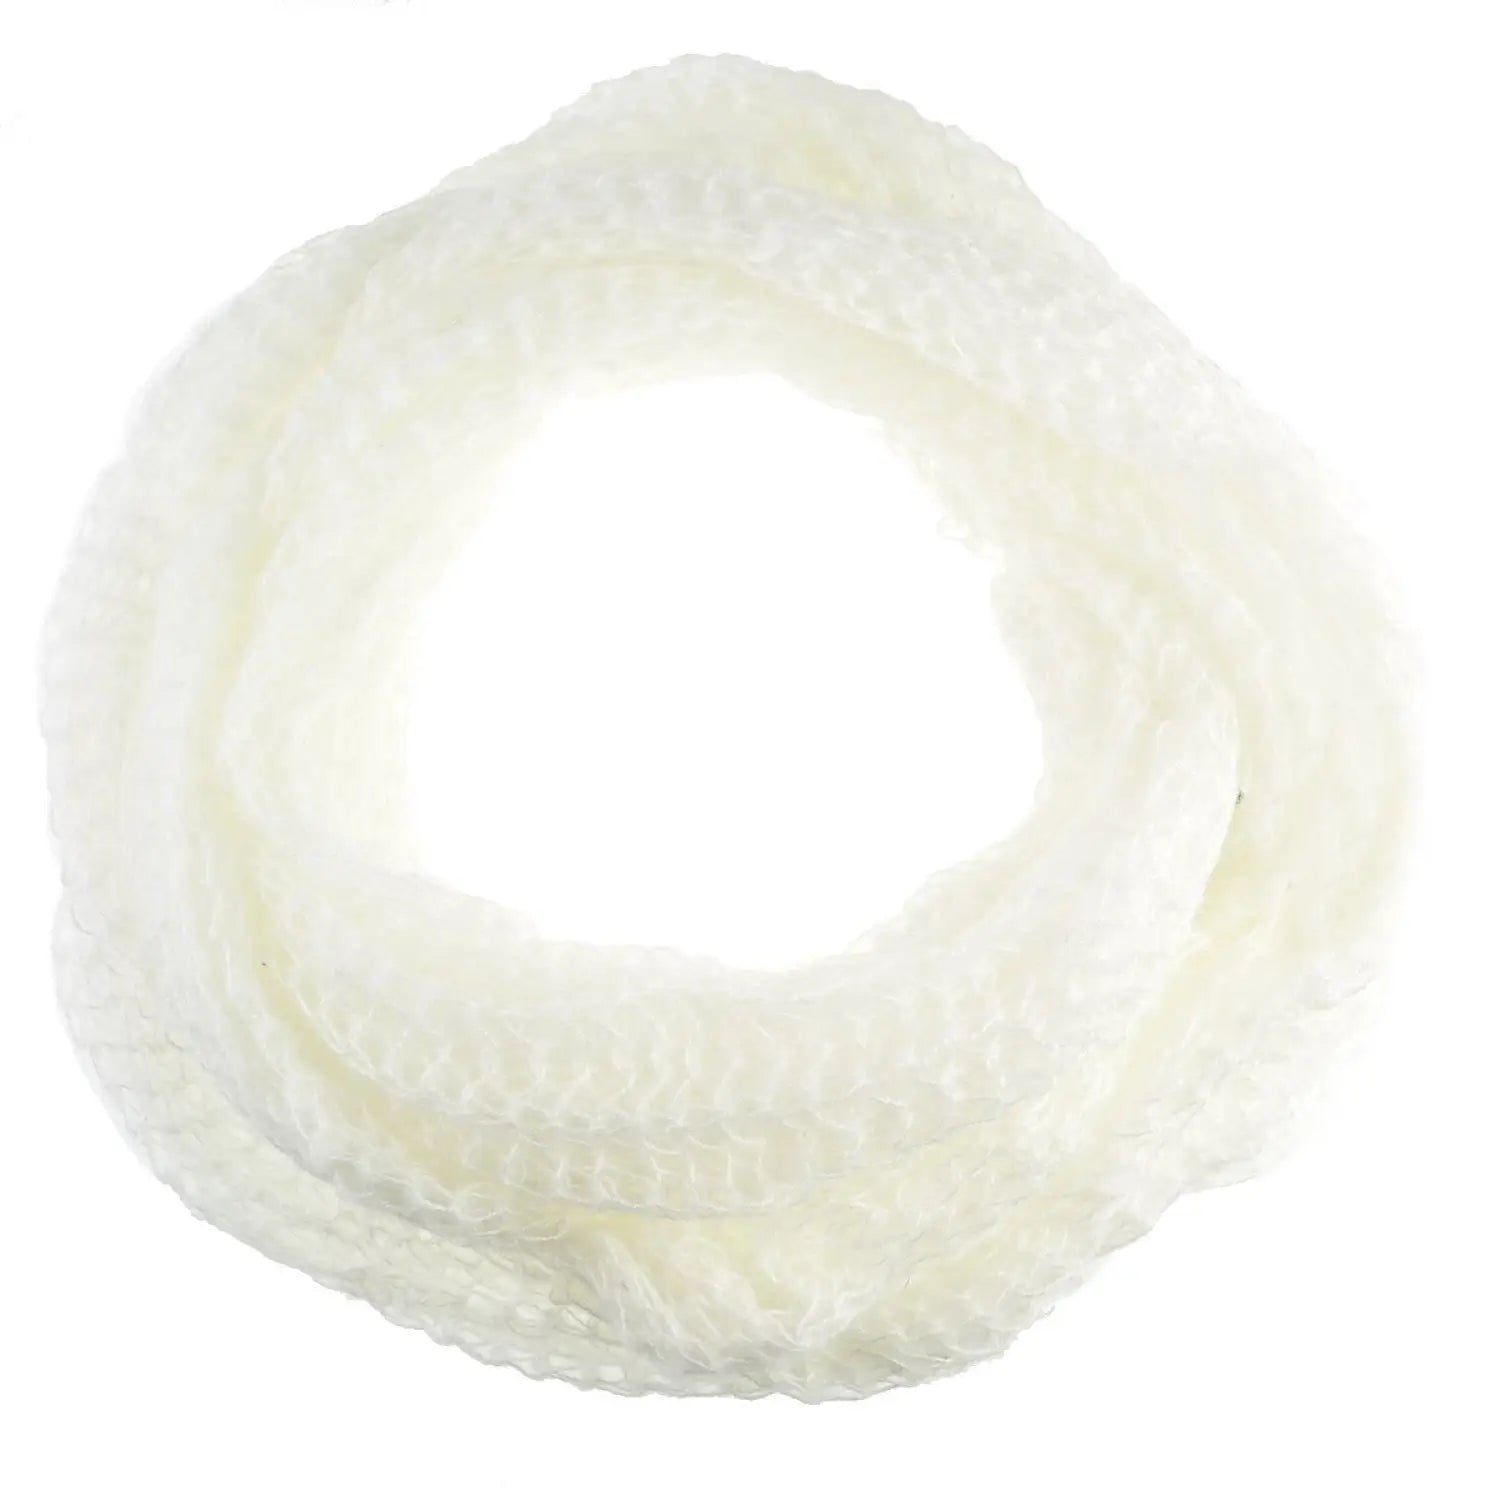 Soft knitted white snood scarf with circle design by Autumn Winter